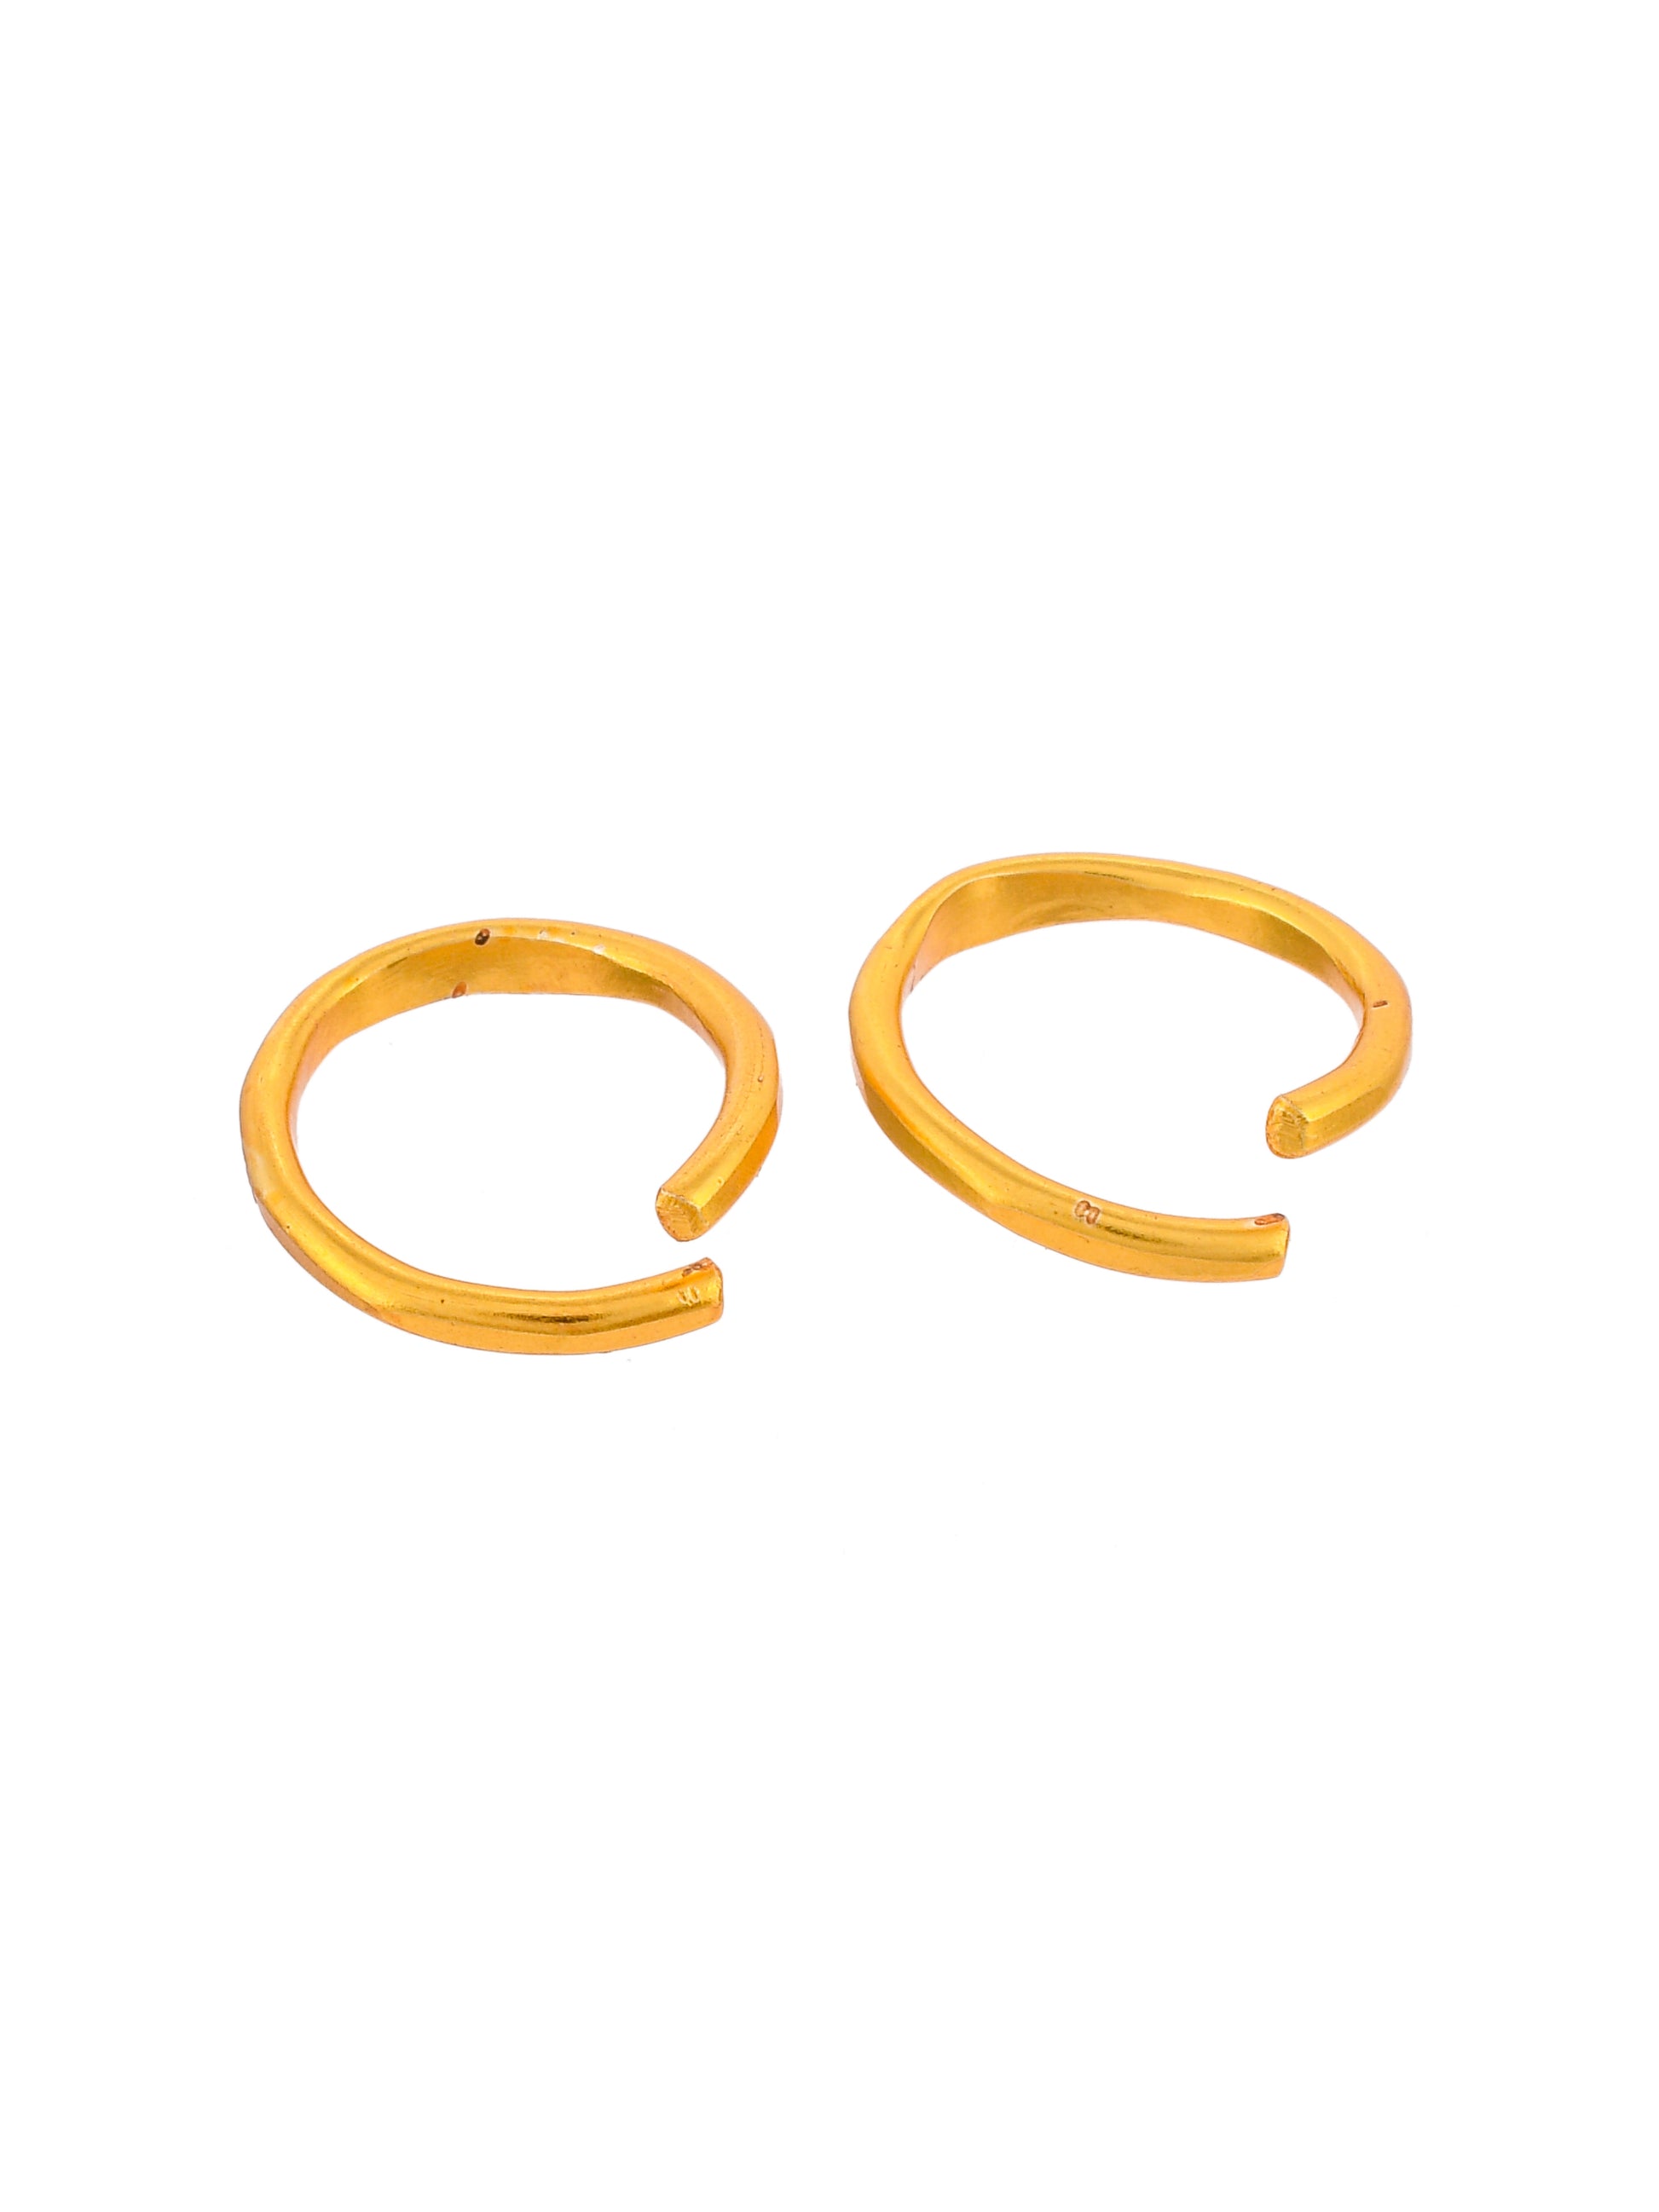 Gold Plated Adjustable Toe Ring for Women